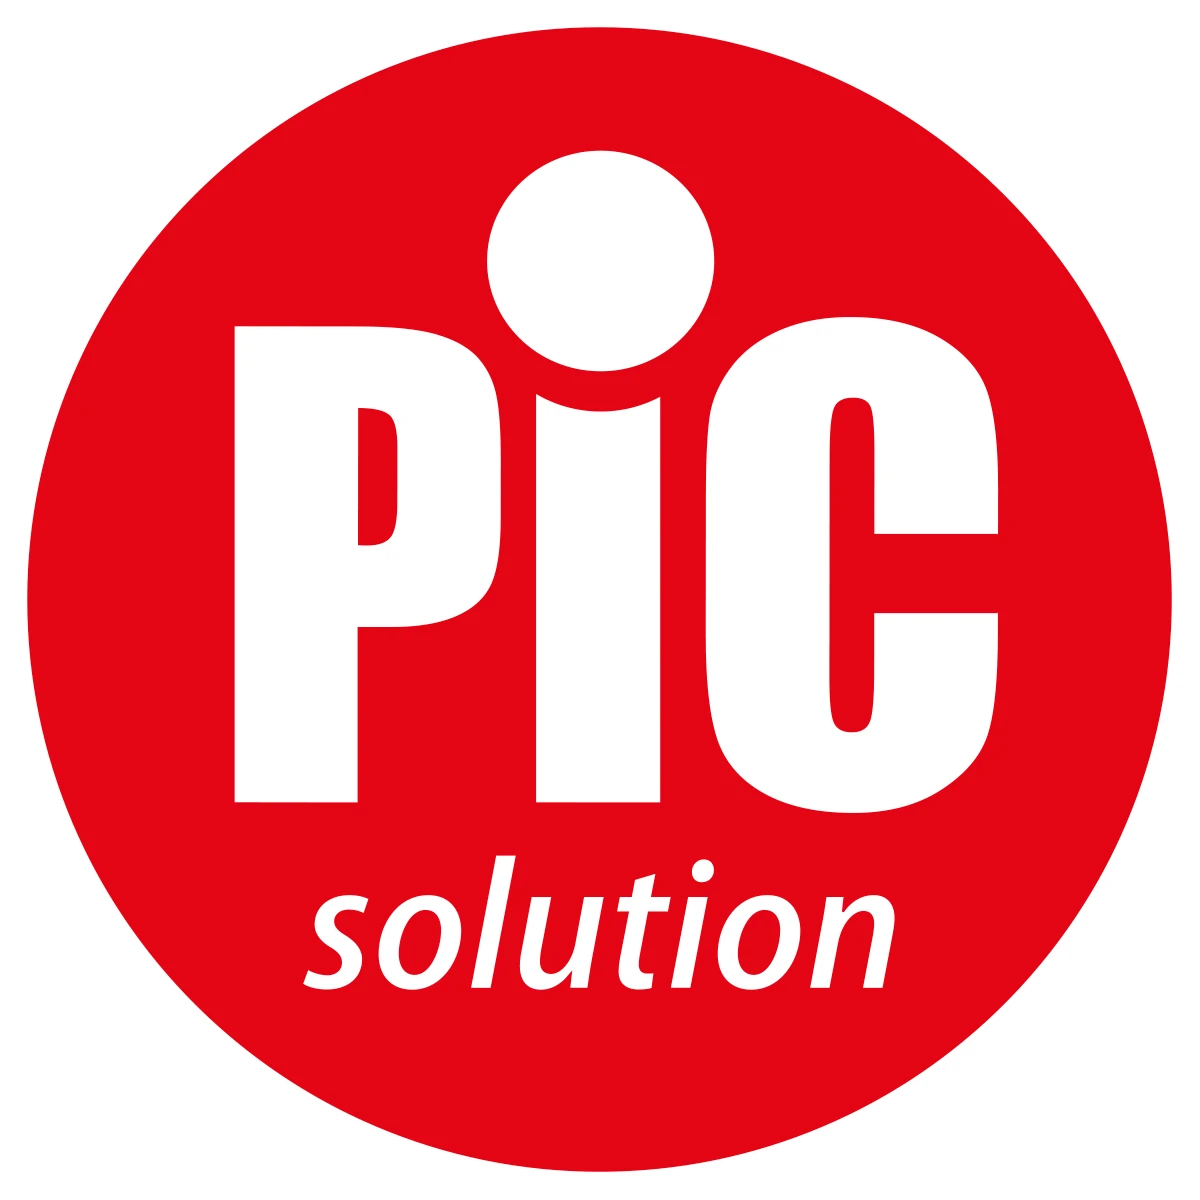 PiC solution